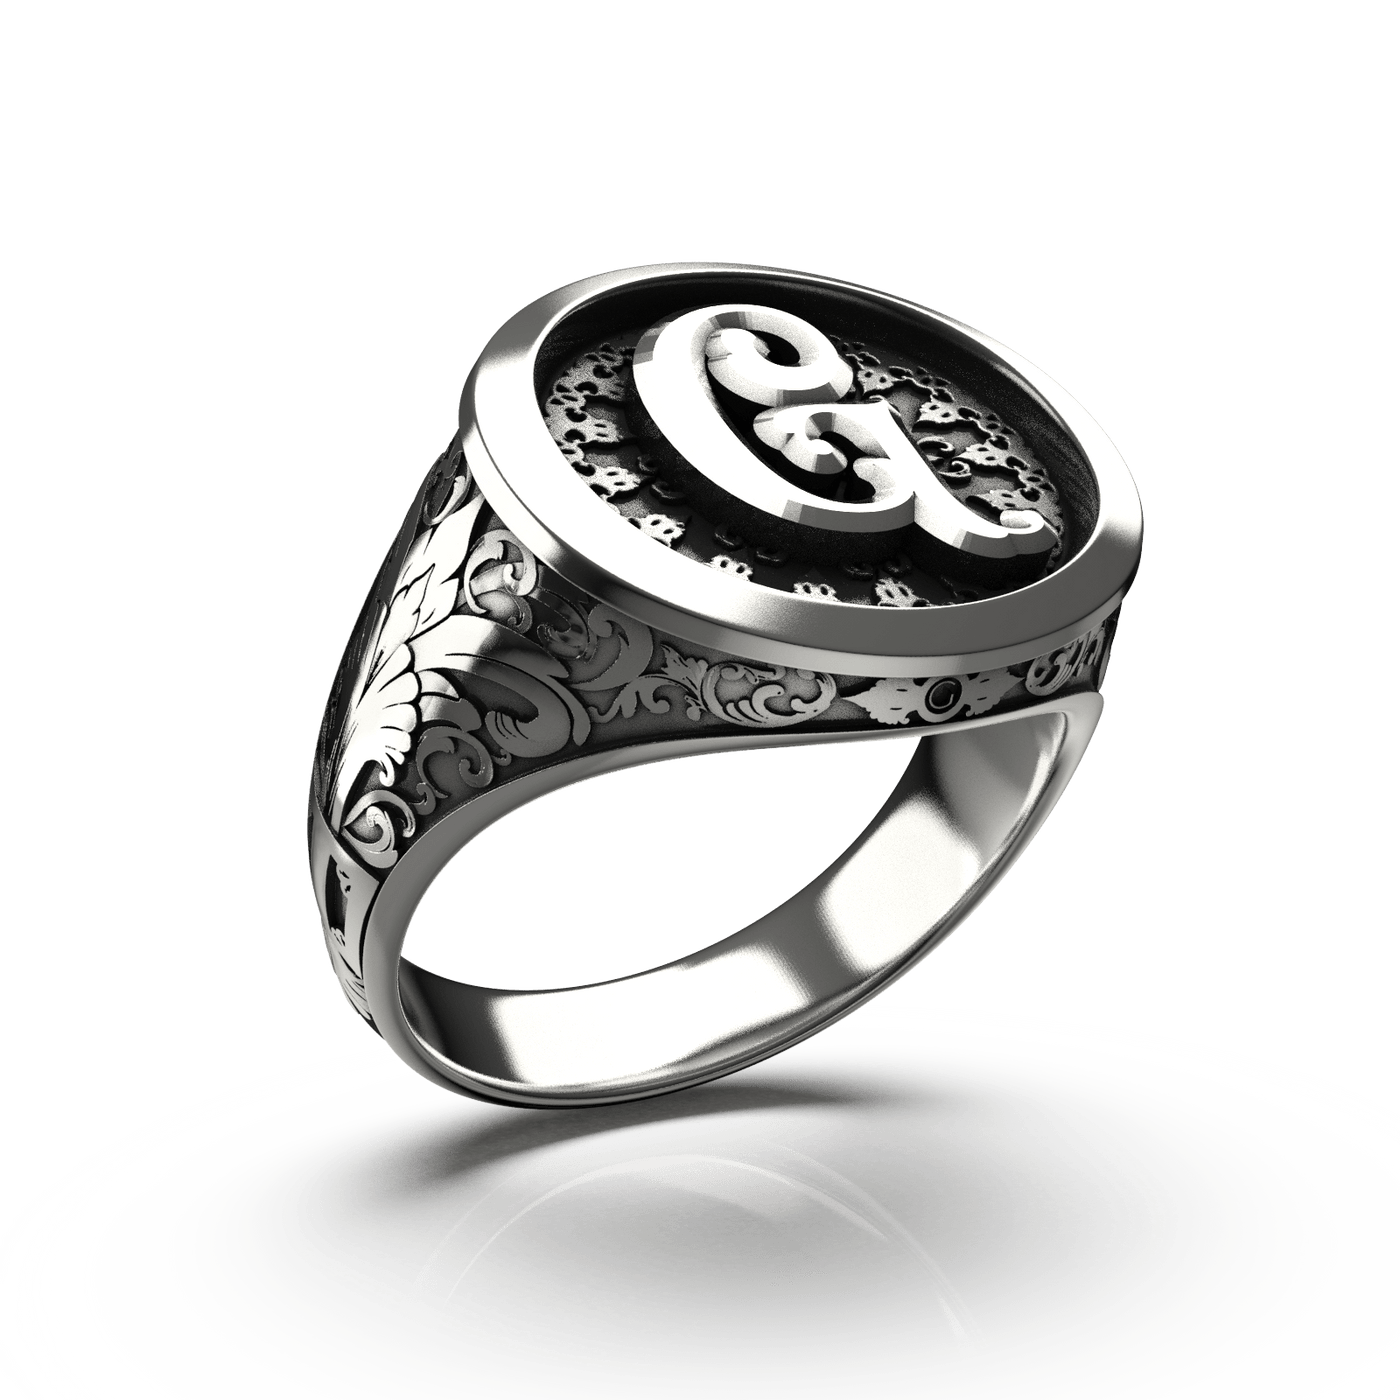 Classic Round Signet Ring - Custom Single Initial - Sterling Silver - Girati Silver Rings for Men